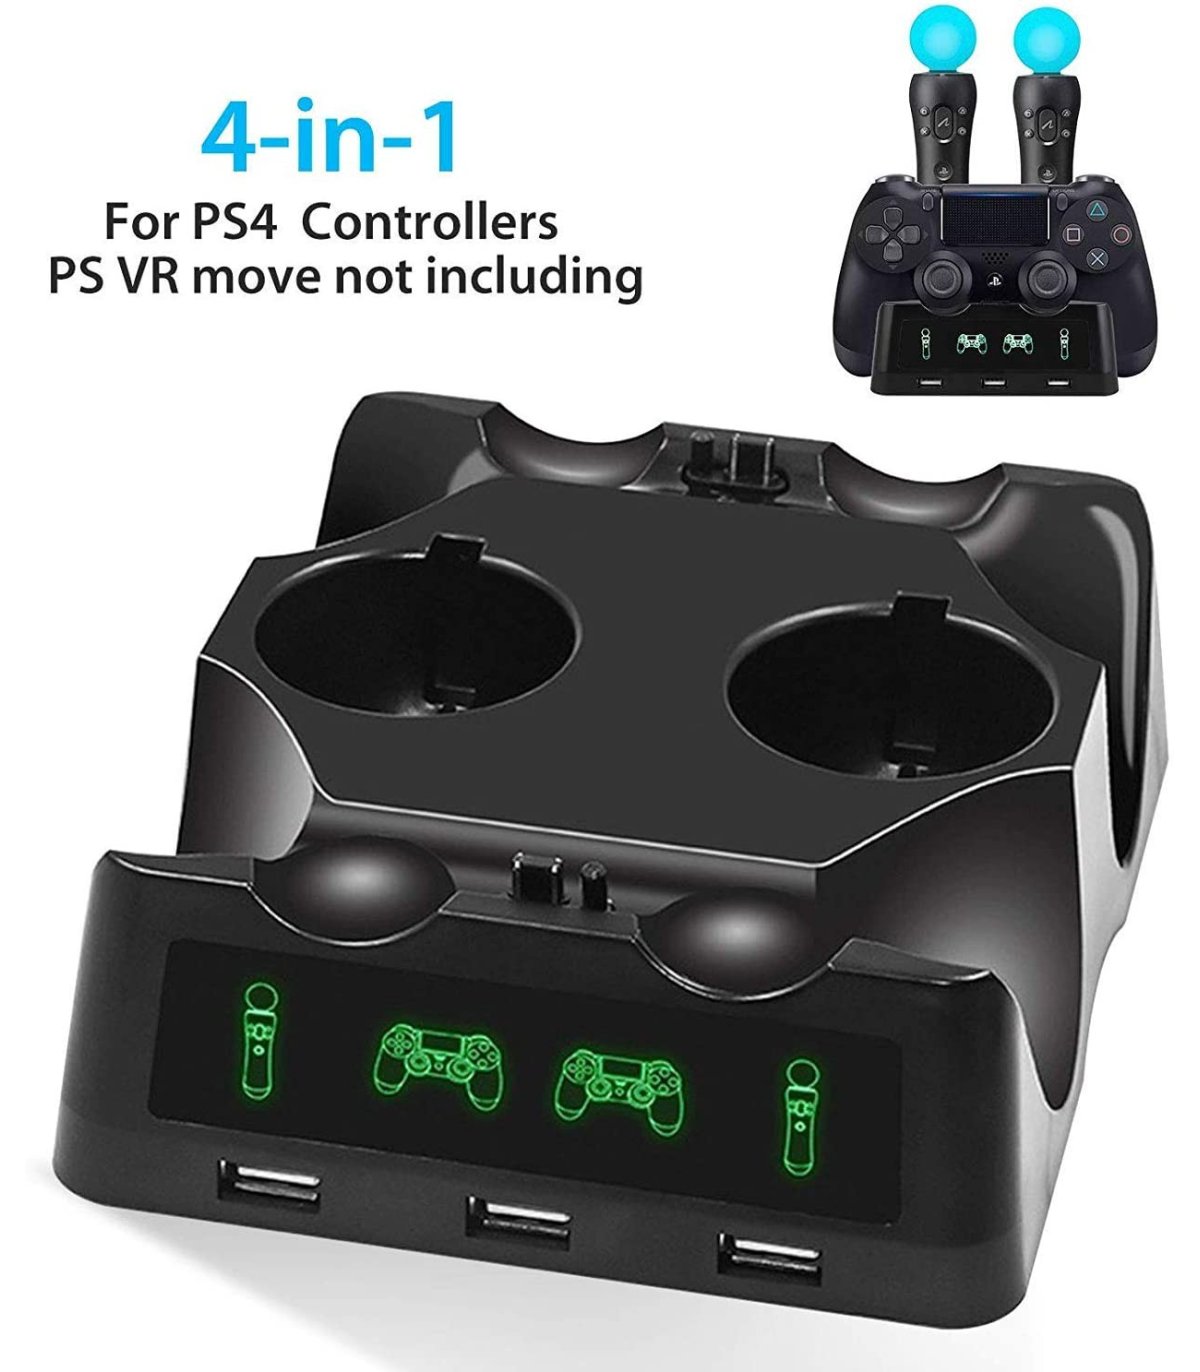 Buy 4 In 1 Ps4 Controller Charger Quad Charger Dock Station Stand For Ps4 Controller And Ps Vr Move Motion Good Price